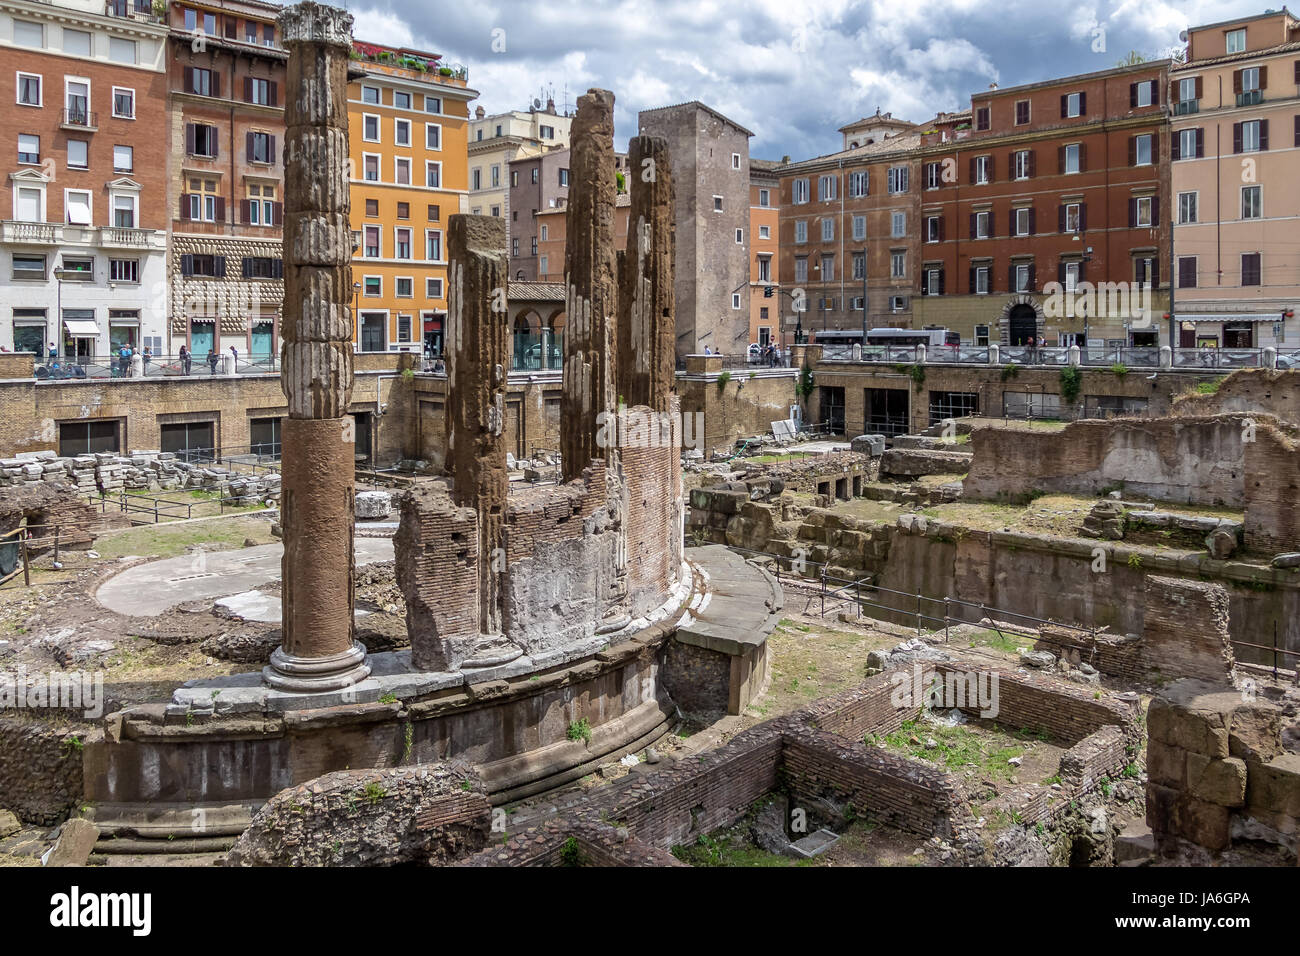 Ancient ruins on Largo di Torre Argentina archaeological area - Rome, Italy Stock Photo